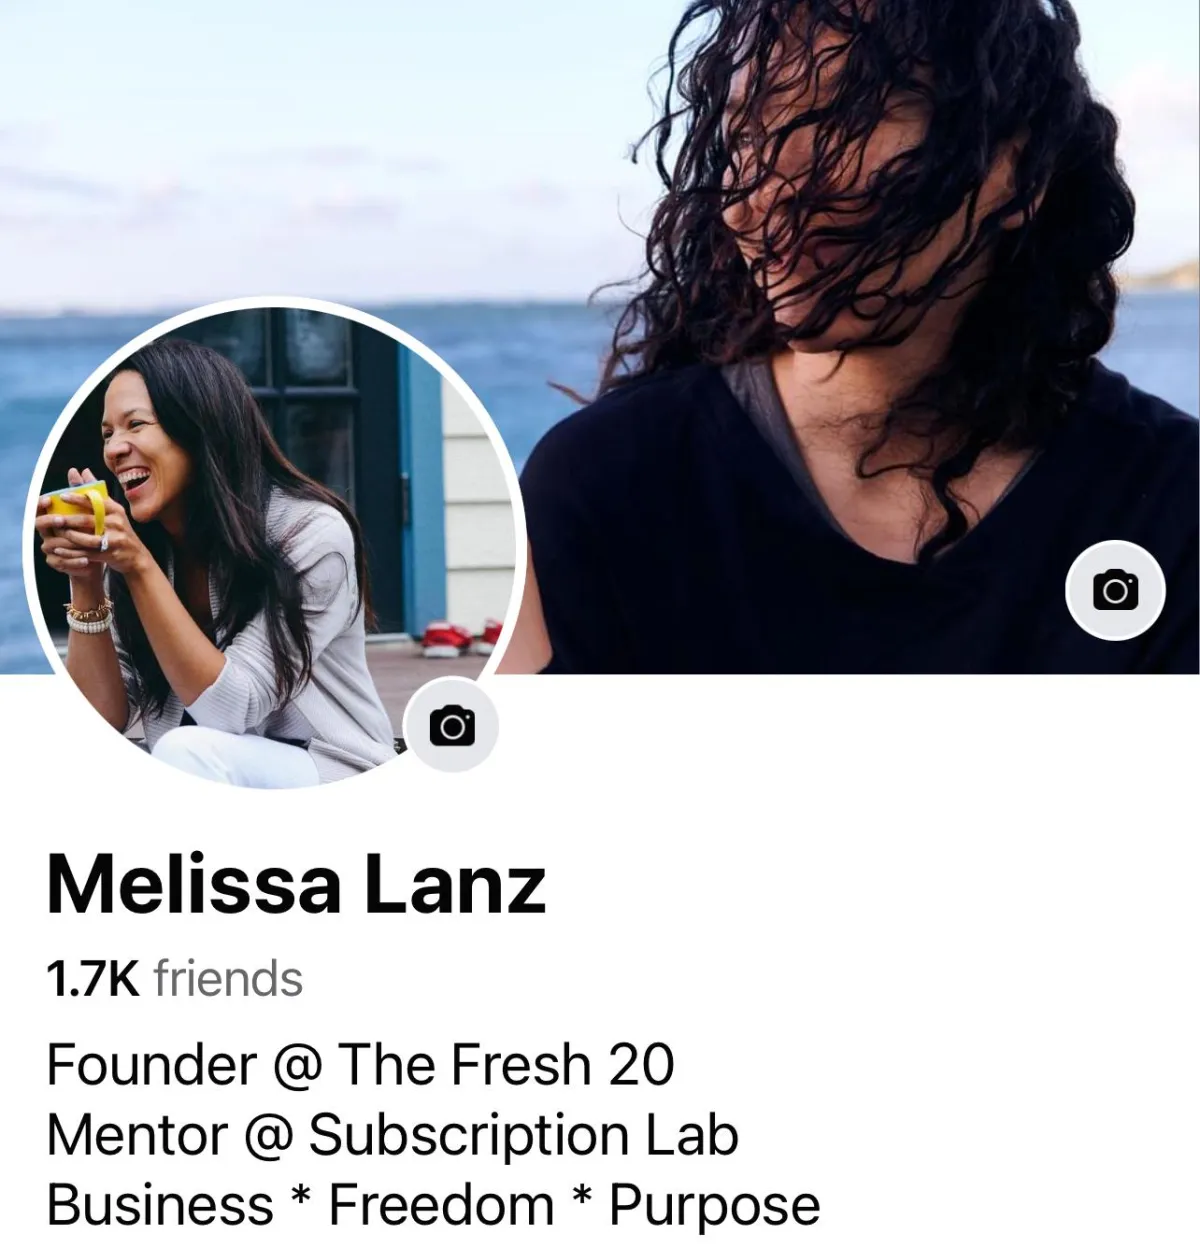 A social media profile of Melissa Lanz, showing a cover photo of a person with wind-blown hair standing by the sea, and a profile picture of Melissa Lanz laughing and holding a cup. The profile information lists 1.7K friends and describes her as the Founder of The Fresh 20 and Mentor at Subscription Lab, with the tagline 'Business * Freedom * Purpose'.